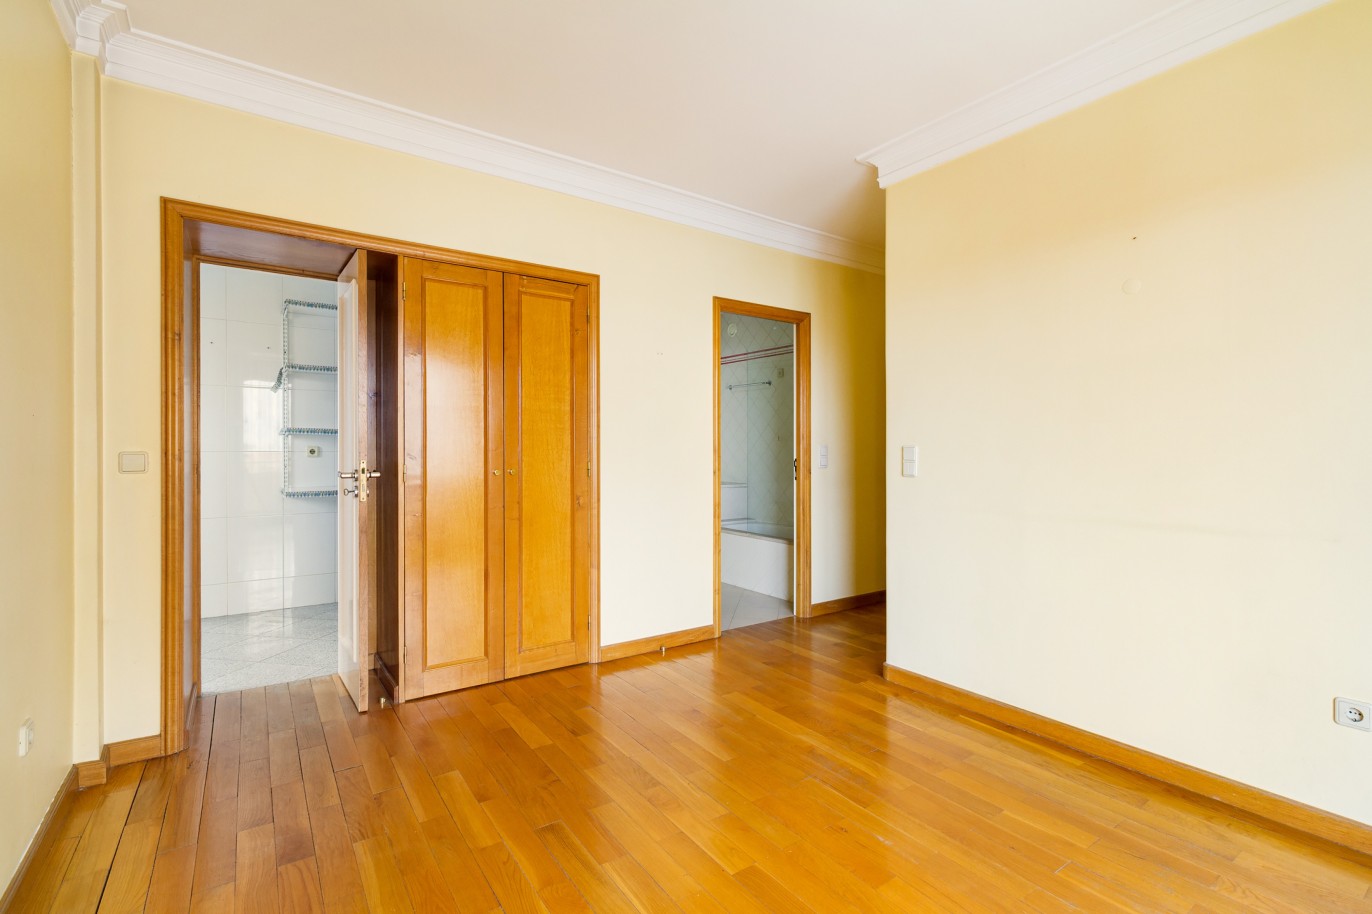 Apartment with balcony, for sale, in Porto, Portugal_221682